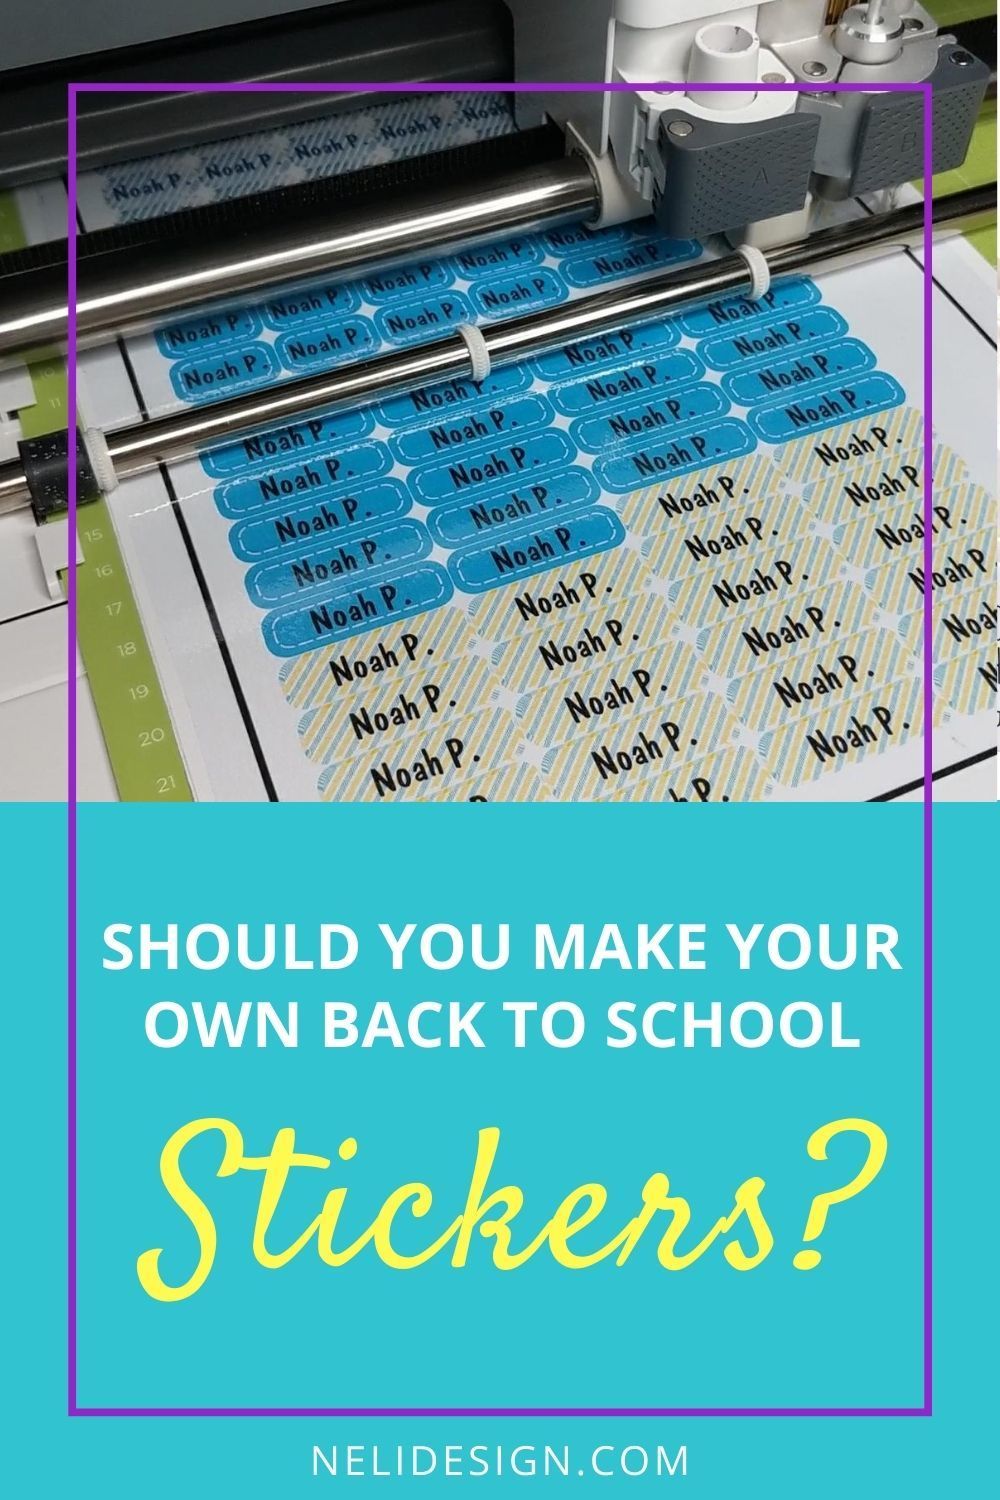 Pinterest image written Should you make your own back to school Stickers?